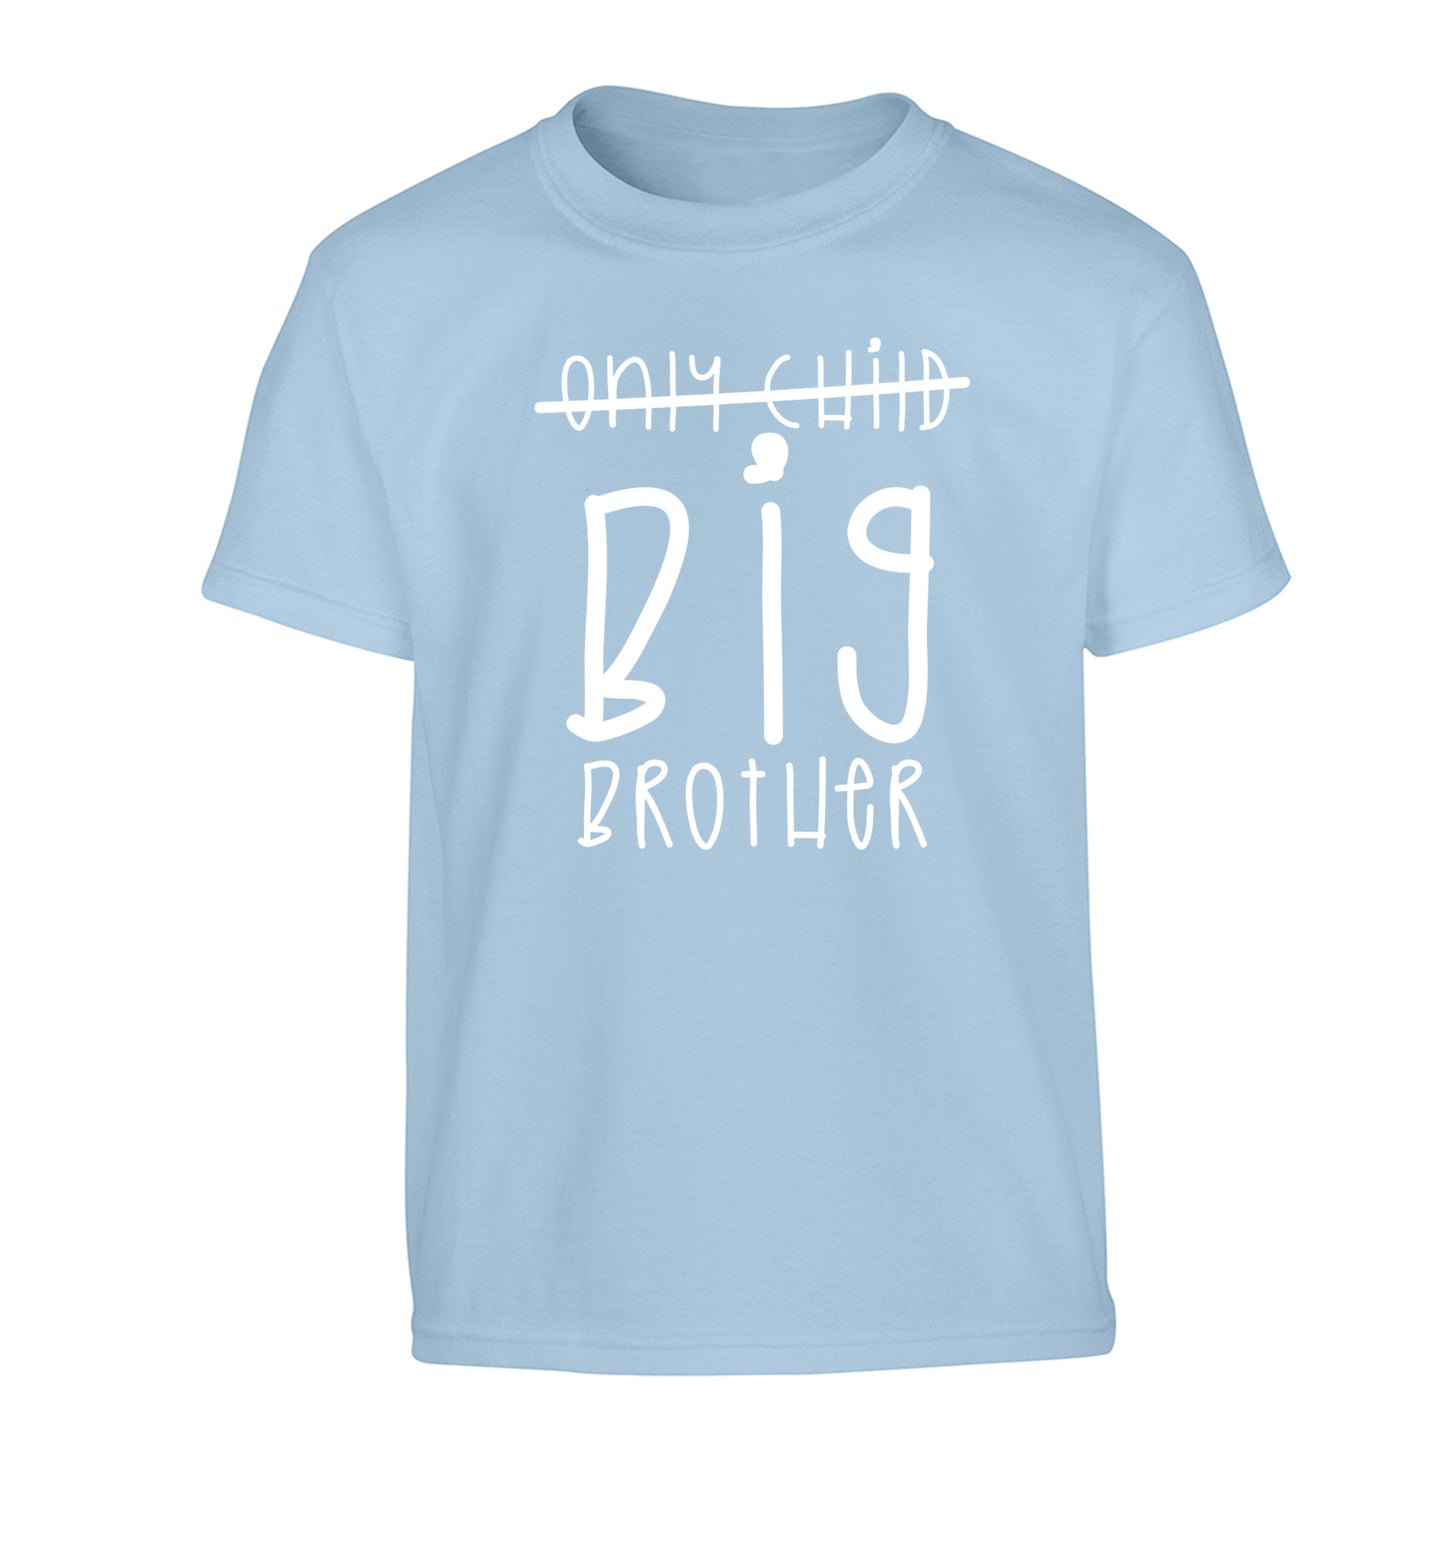 Only child big brother Children's light blue Tshirt 12-14 Years